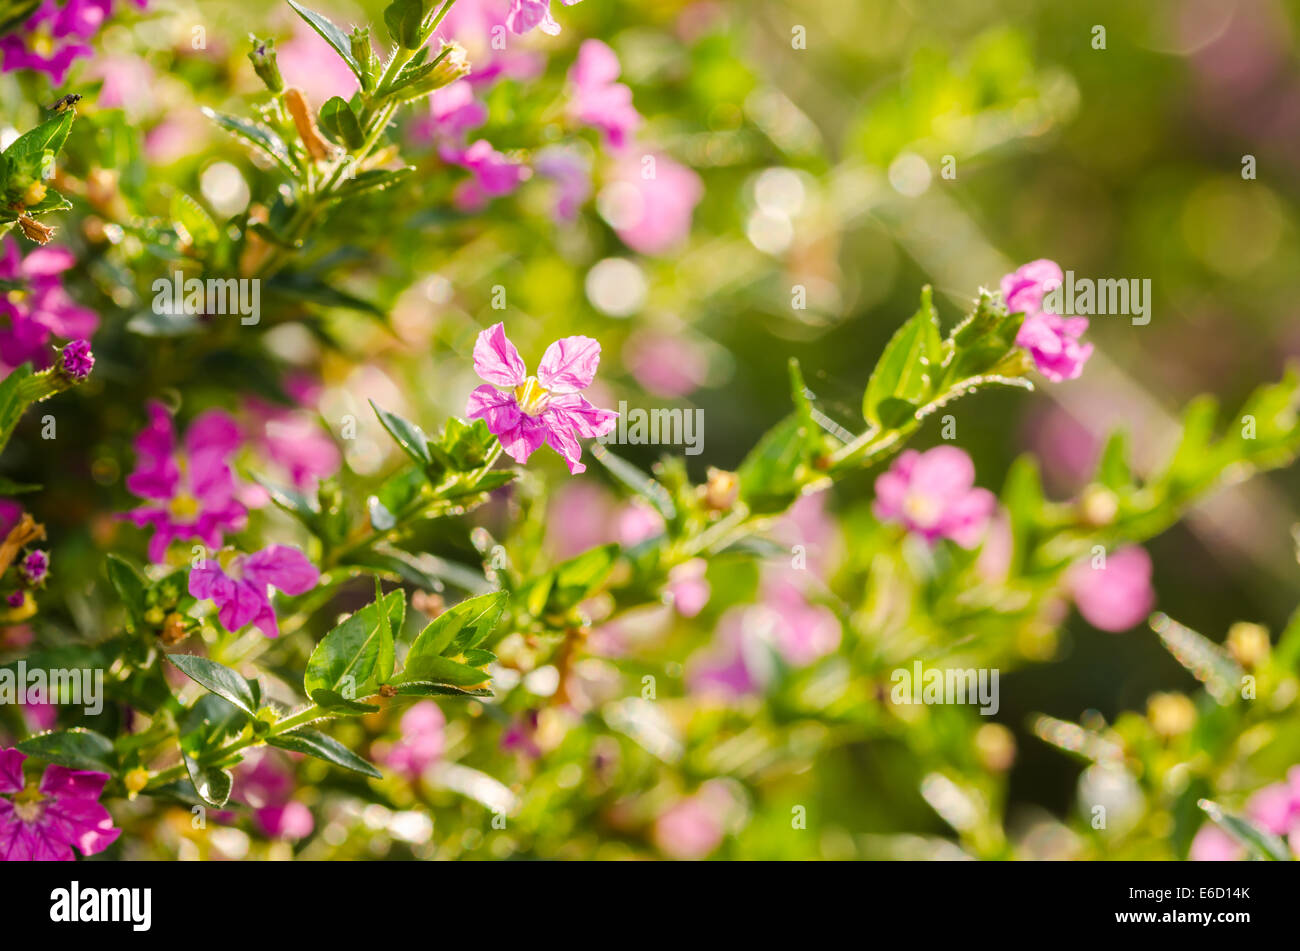 Pink Pink Cuphea hyssopifolia or false heather or Mexican heather or Hawaiian heather or elfin herb flower flower in the garden  Stock Photo